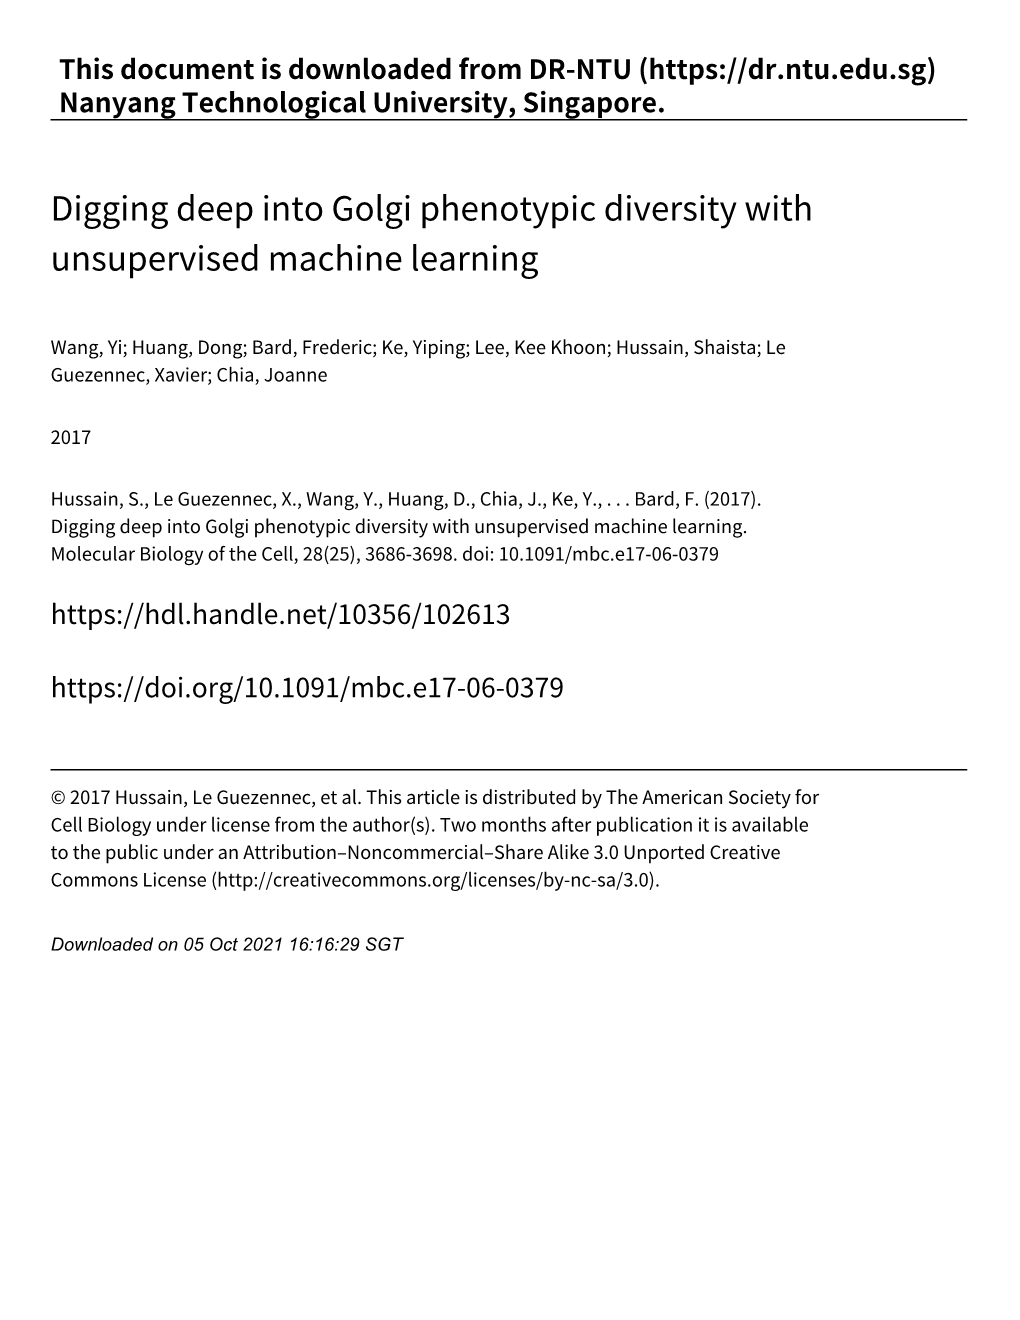 Digging Deep Into Golgi Phenotypic Diversity with Unsupervised Machine Learning